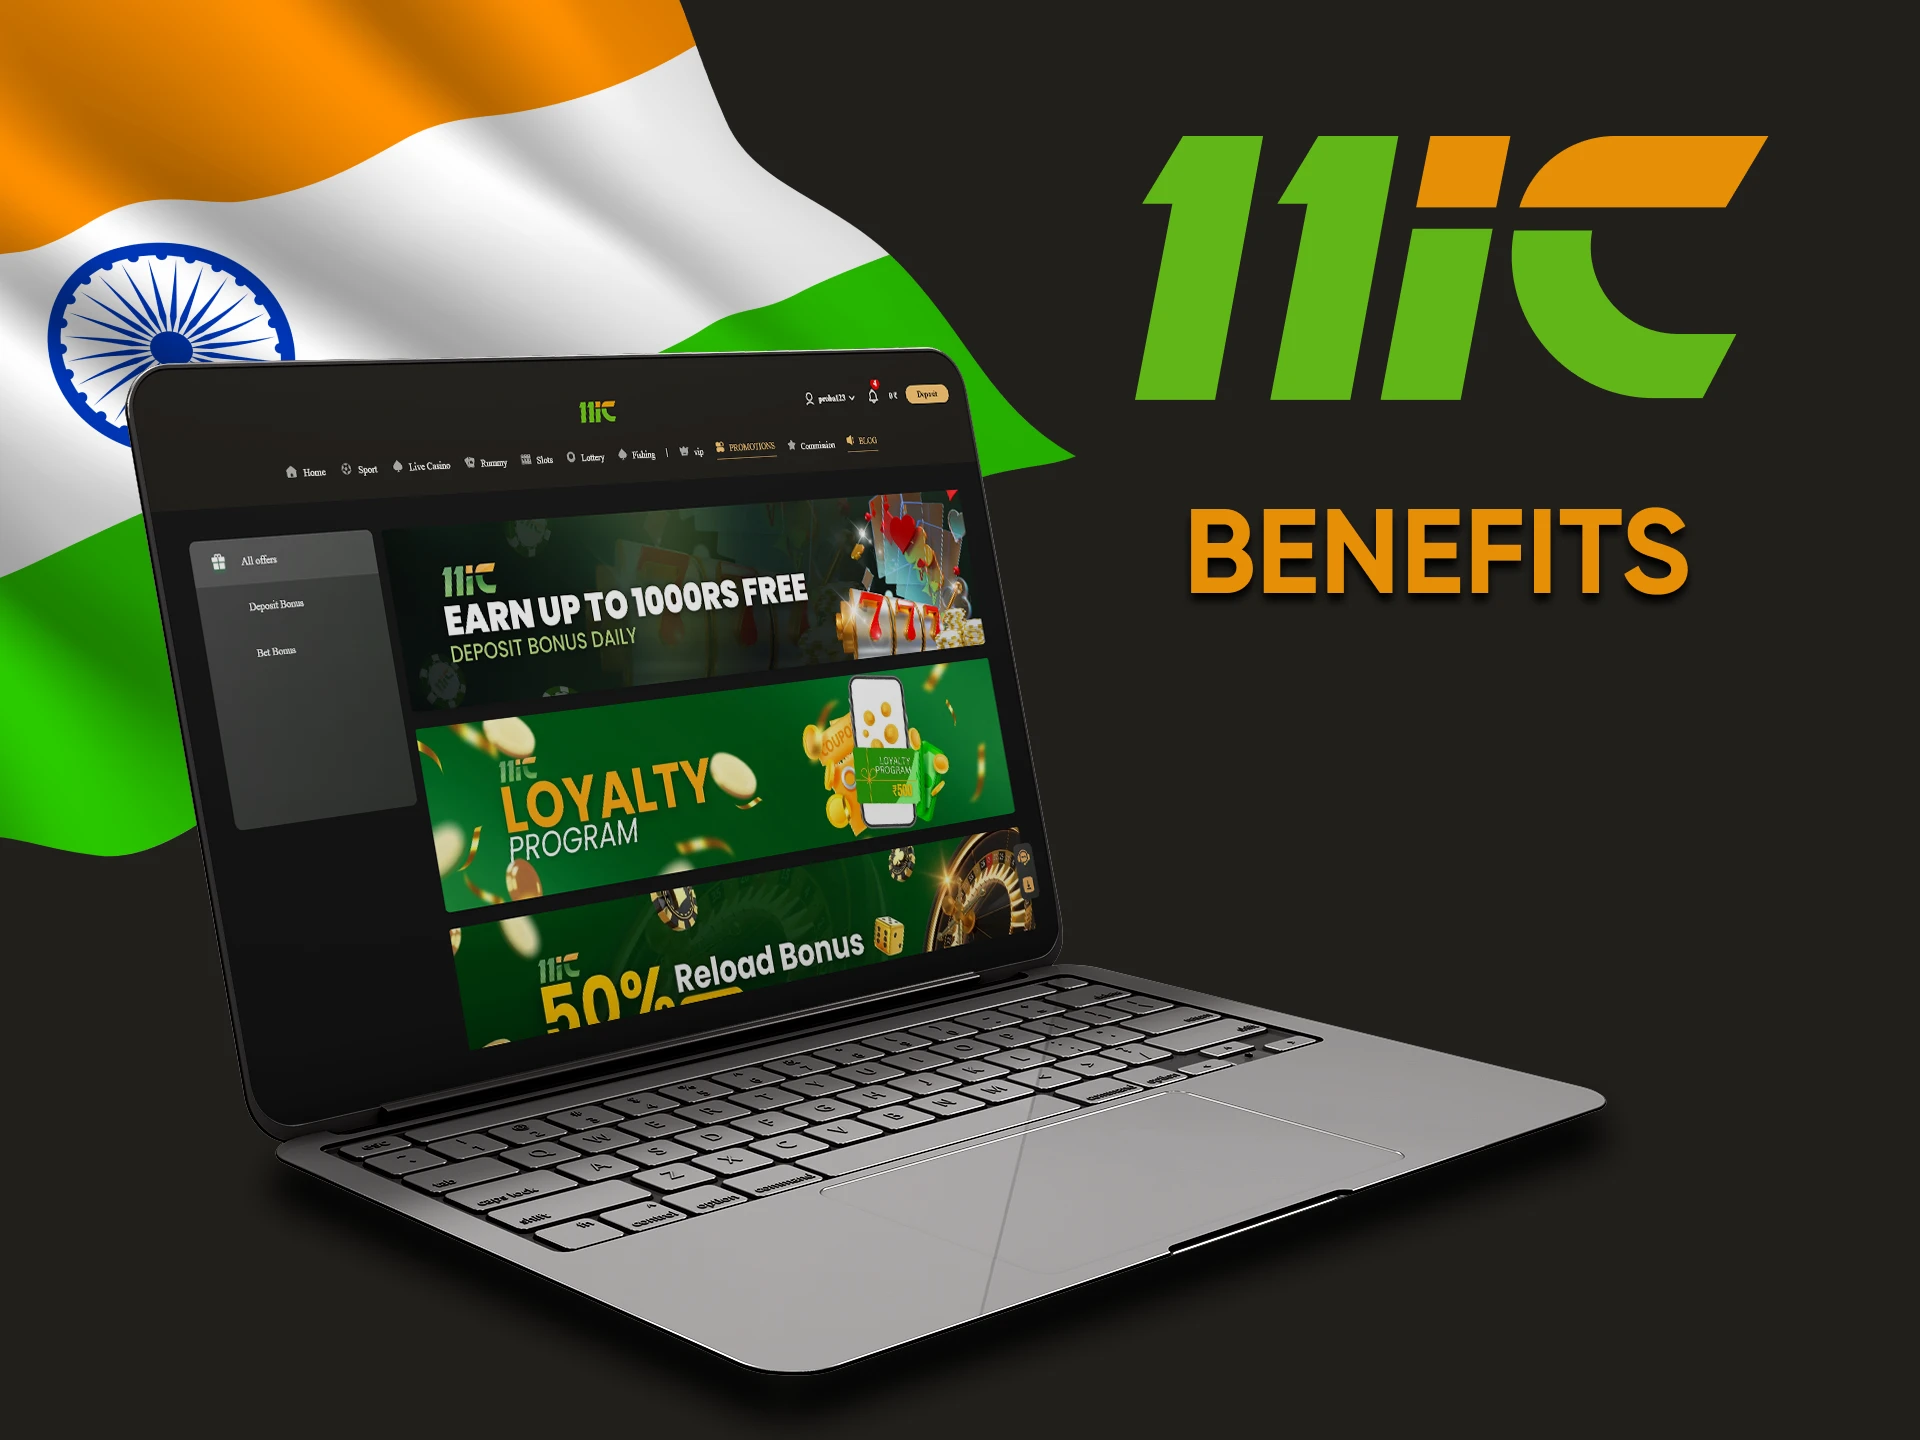 We will tell you about the benefits of 11ic for betting.